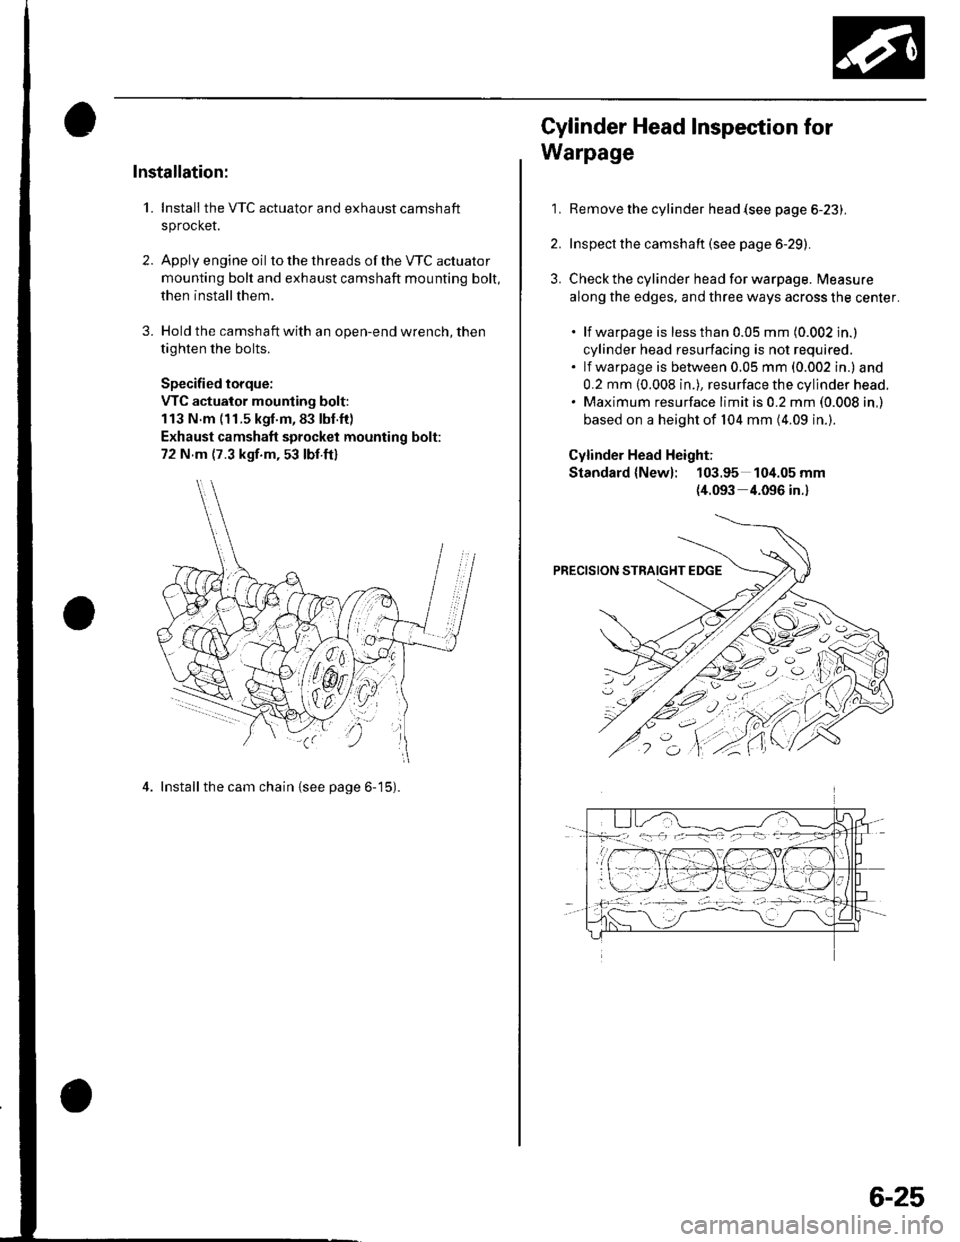 HONDA CIVIC 2003 7.G Service Manual Installation:
1. Install the VTC actuator and exhaust camshaft
sprocket.
2. Apply engine oil to the th reads of the VTC actuato r
mounting bolt and exhaust camshaft mounting bolt,
then install them.
3